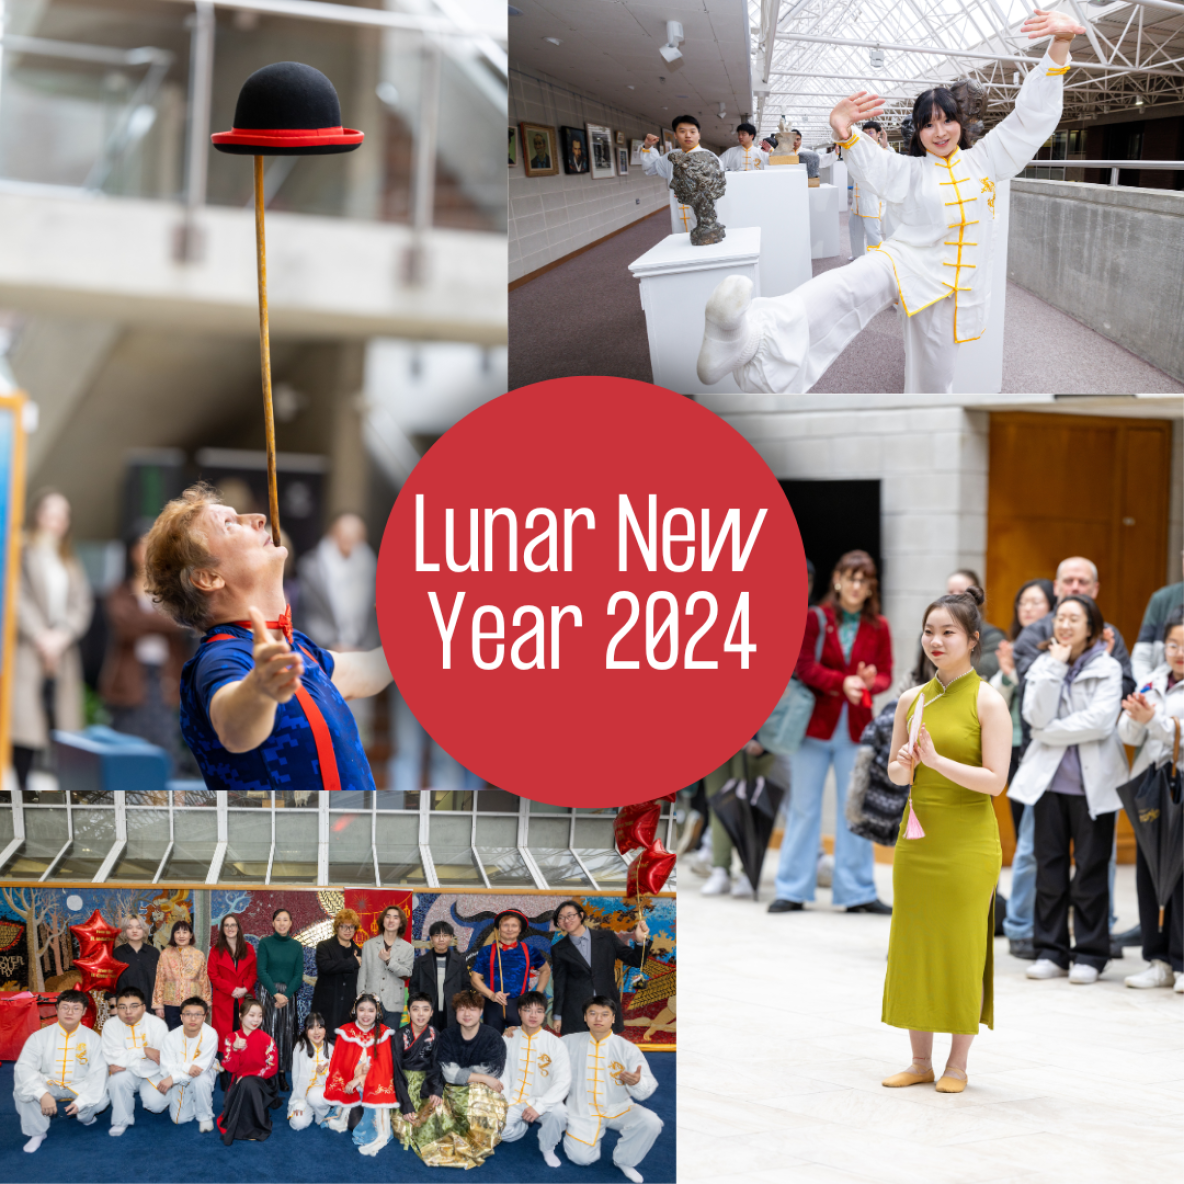 A collage of the performers during Lunar New year 2024